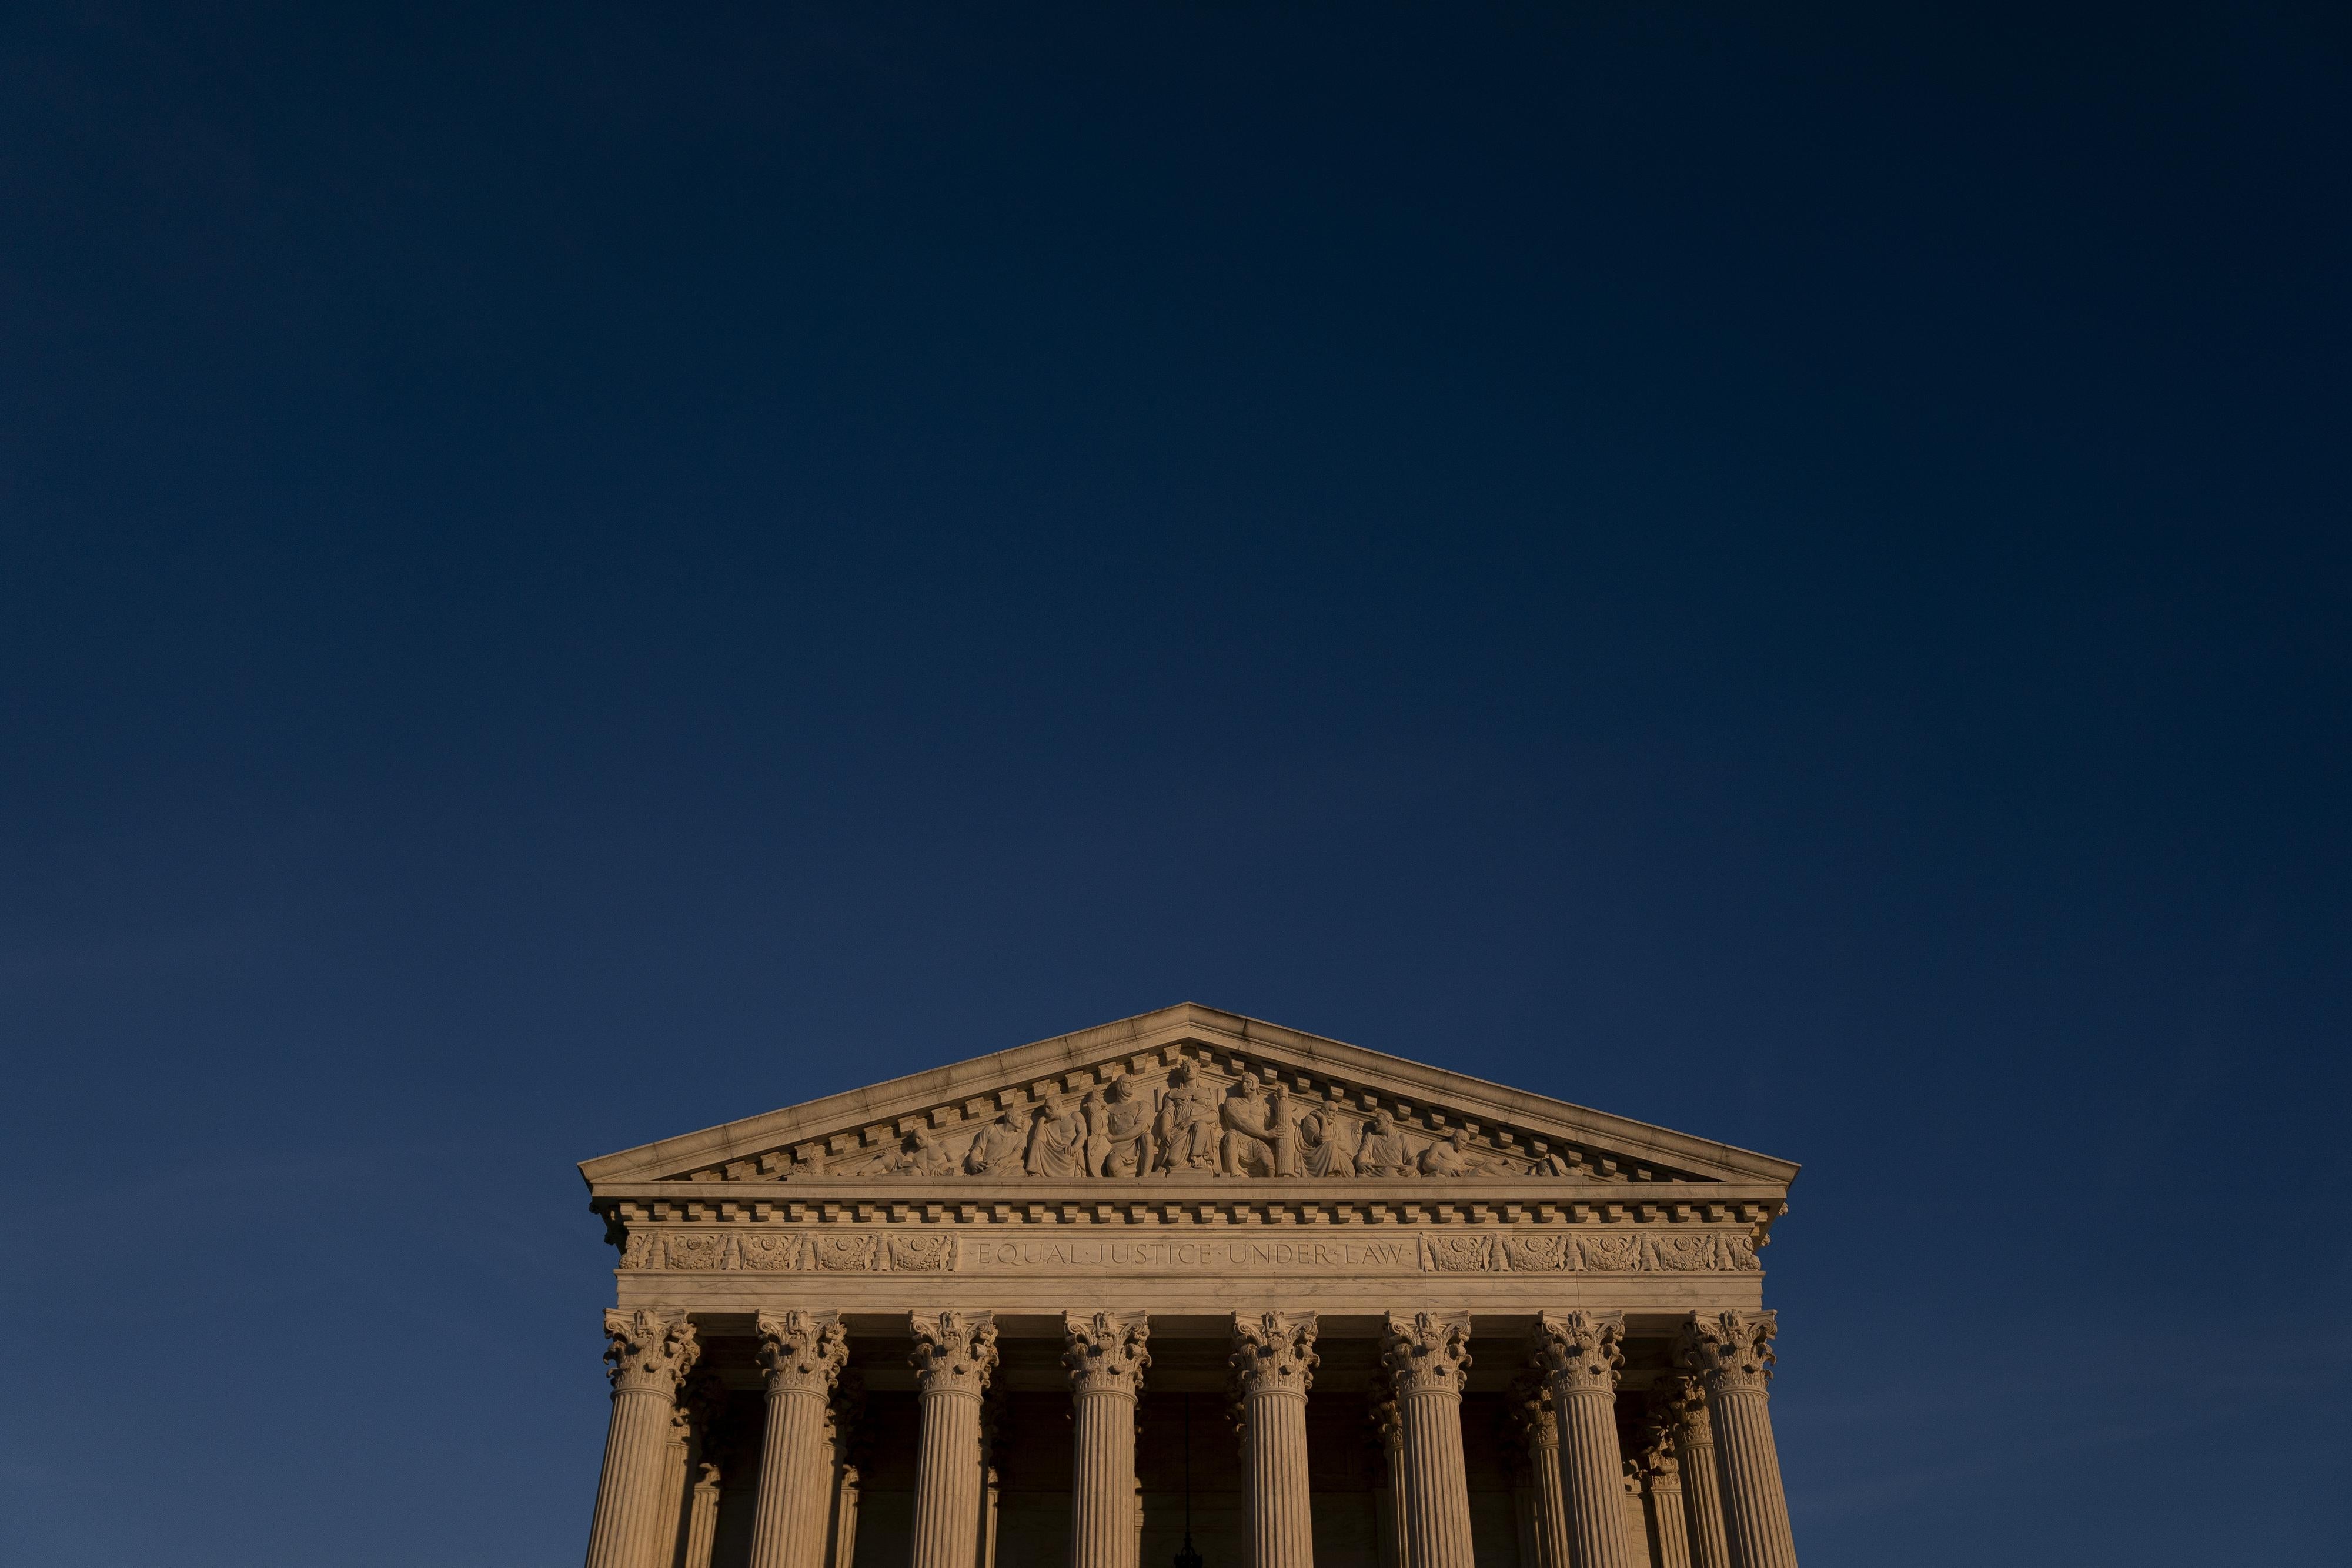 The Supreme Court at dusk.